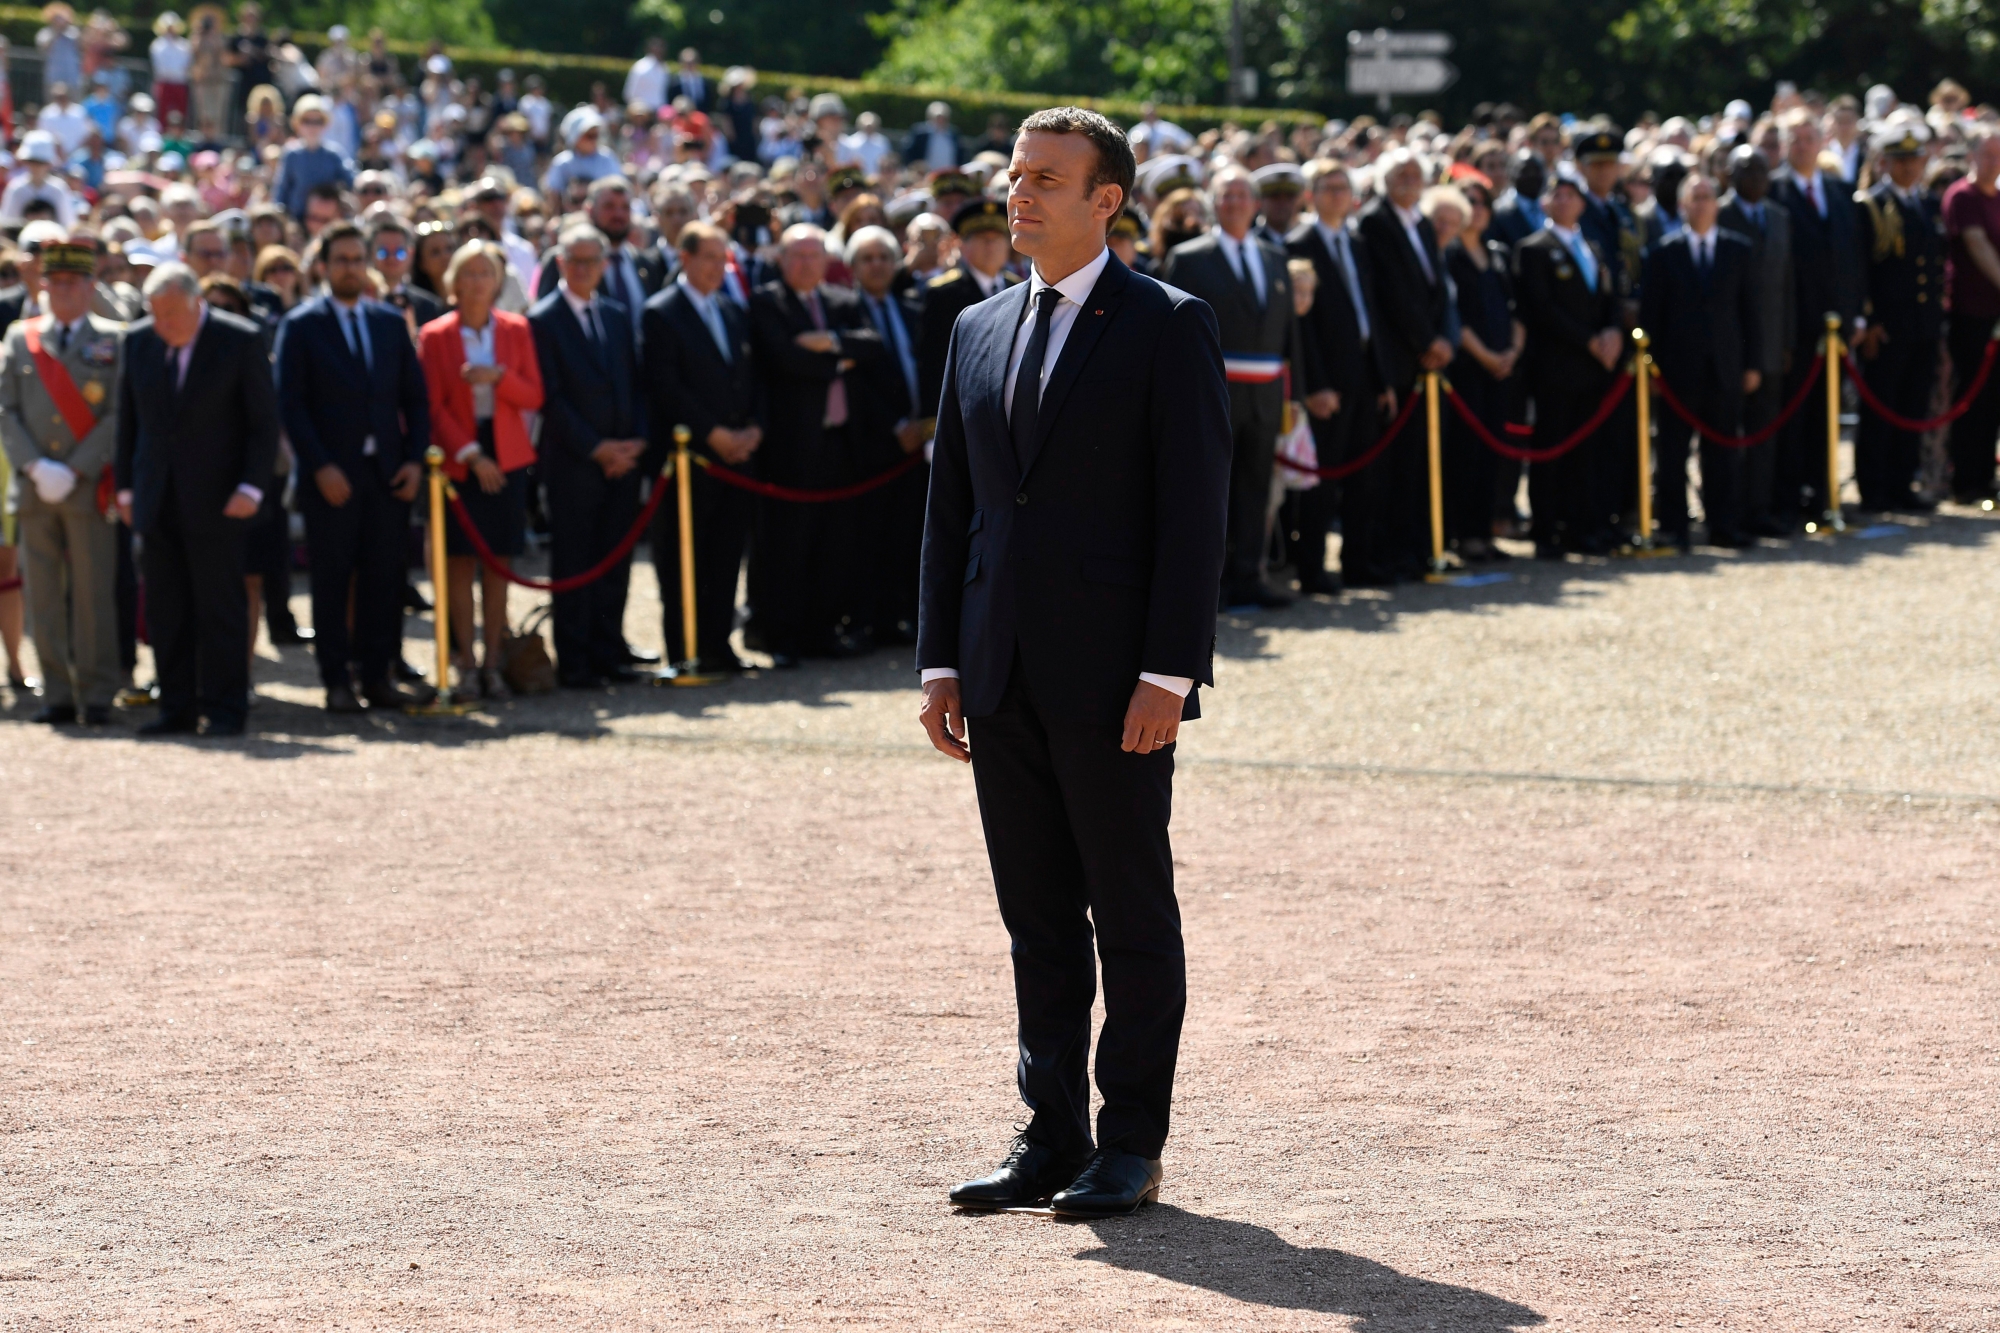 epa06035254 French President Emmanuel Macron attends a ceremony marking to mark the 77th anniversary of General Charles de Gaulle's appeal of 18 June 1940, at the Mont Valerien memorial in Suresnes, near Paris, France, 18 June 2017. The appeal marks the beginning of the French resistance after the fall of France to Nazi Germany.  EPA/BERTRAND GUAY / POOL MAXPPP OUT FRANCE WWII COMMEMORATION